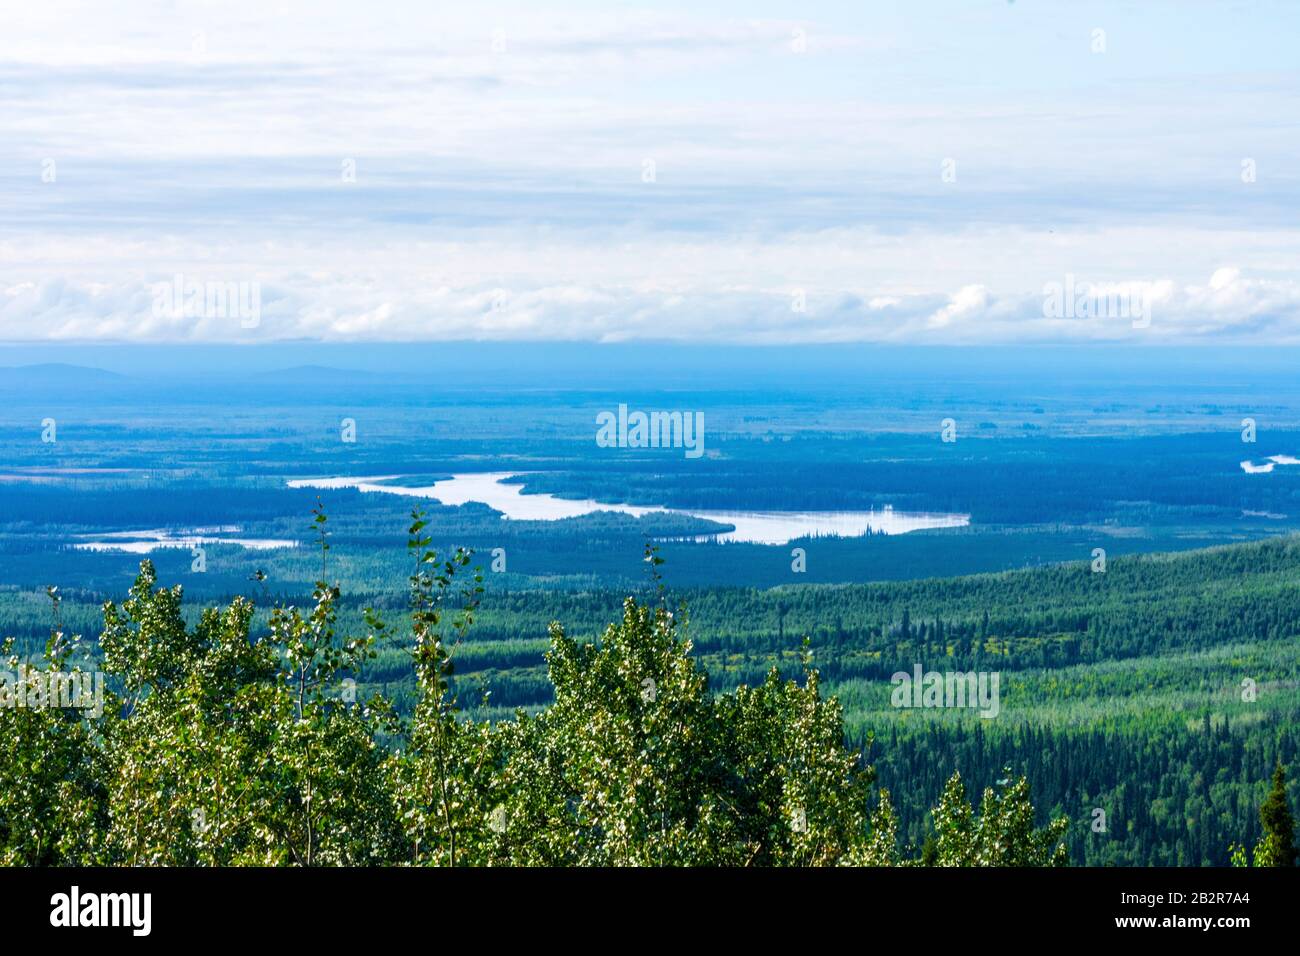 Alaska landscape photography, last frontier, scenic lakes over look, Fairbanks Alaska road trip, Unspoiled Wilderness, Pacific north west mountains Stock Photo